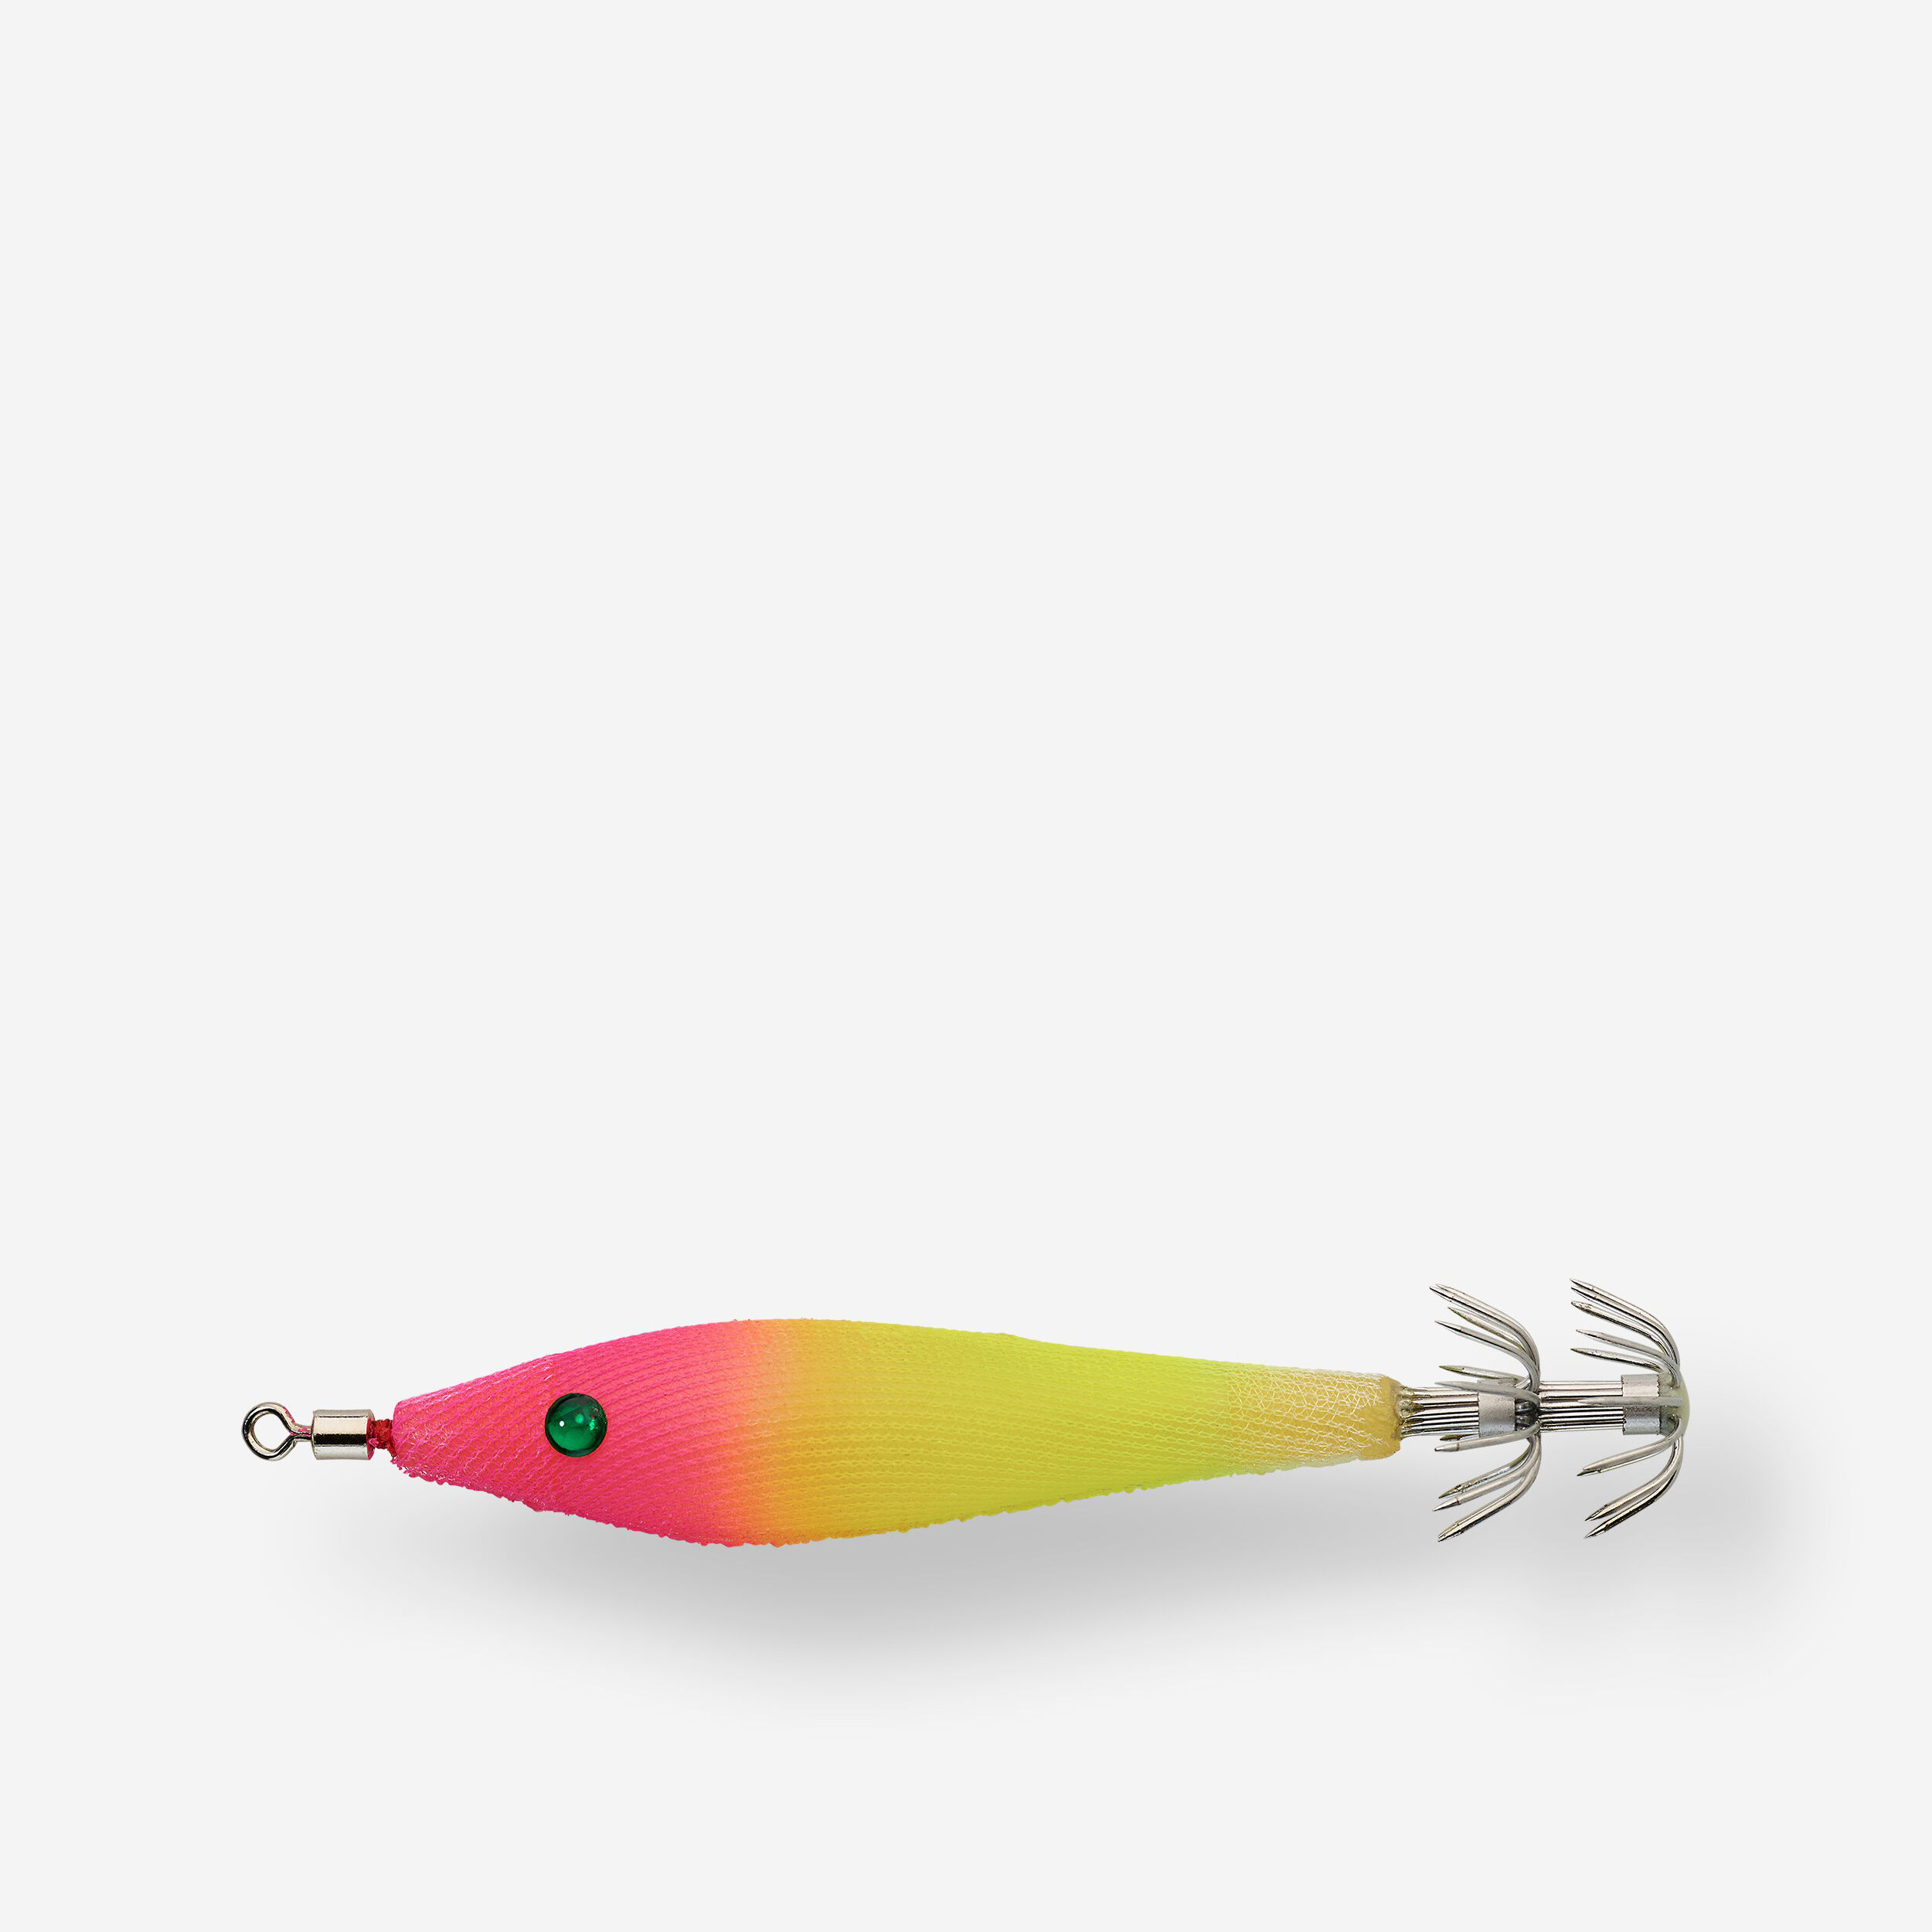 CAPERLAN Oppai EBIKA SFT 2.0/60 Jig for Cuttlefish and Squid fishing - Neon Pink